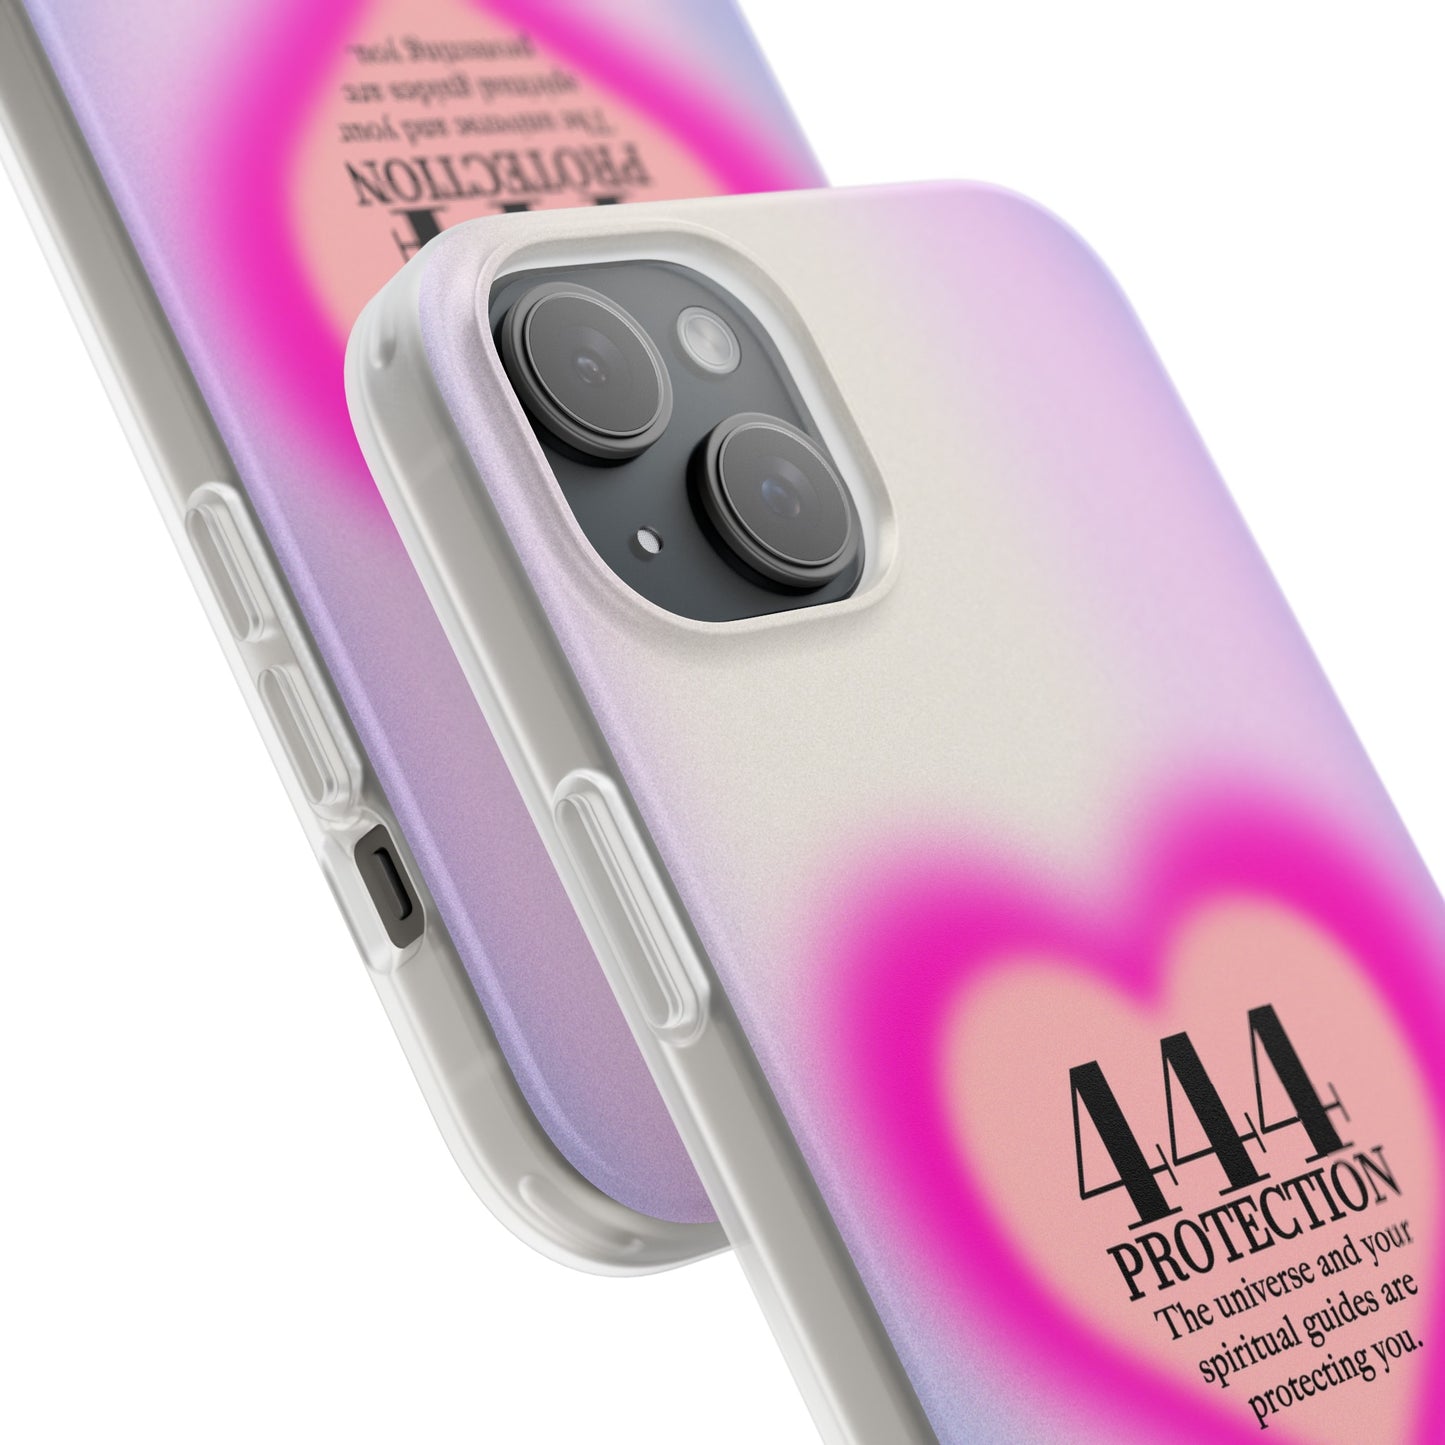 Angel Number 444 iPhone Case